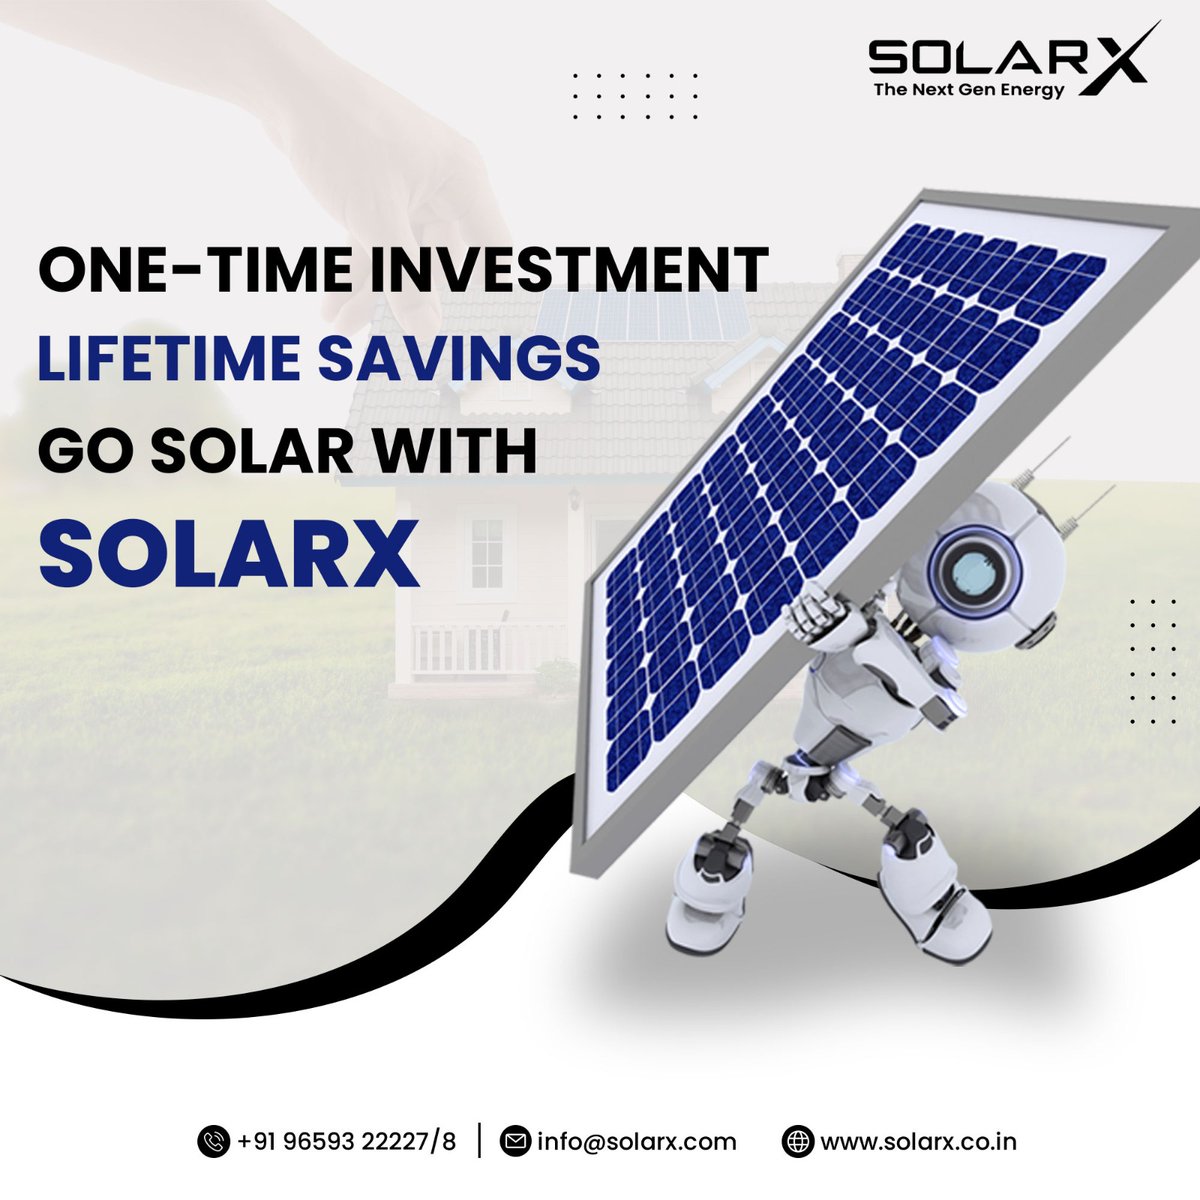 You can save money on your energy bills for the rest of your life by making a  #onetimeinvestment  in a #solarpanels system. It could be a wise financial choice that saves money over the long term and contributes to a future that is cleaner and more sustainable.
#SolarX  #GoSolar